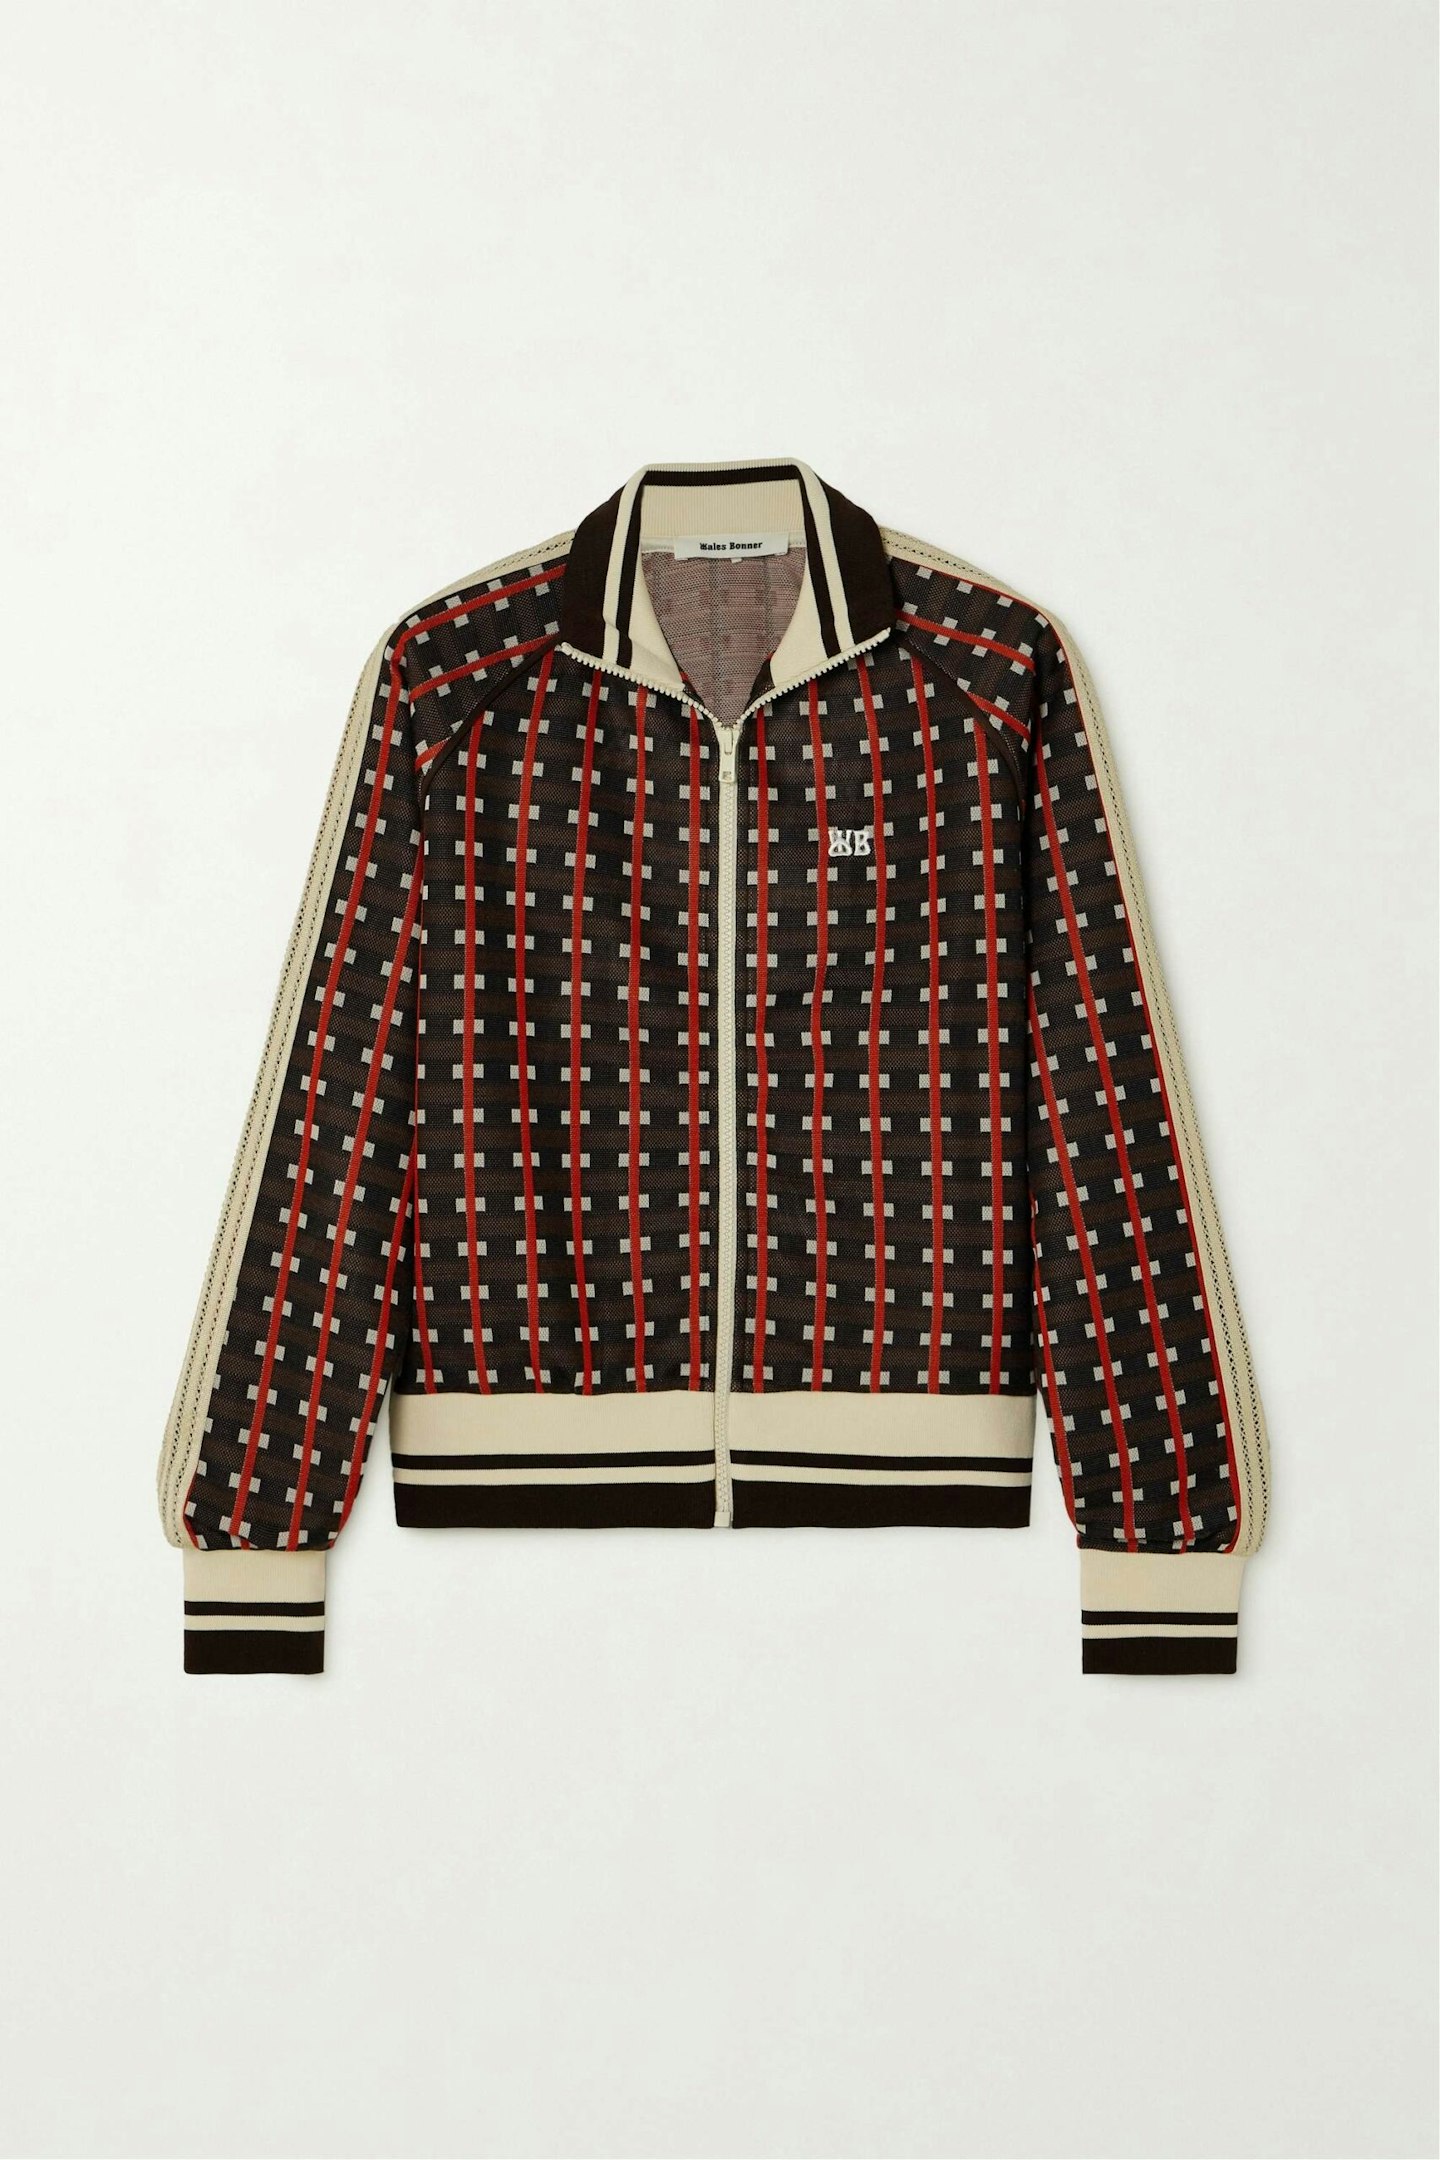 Wales Bonner Power Crochet-Trimmed Recycled Jacquard-Knit Track Jacket